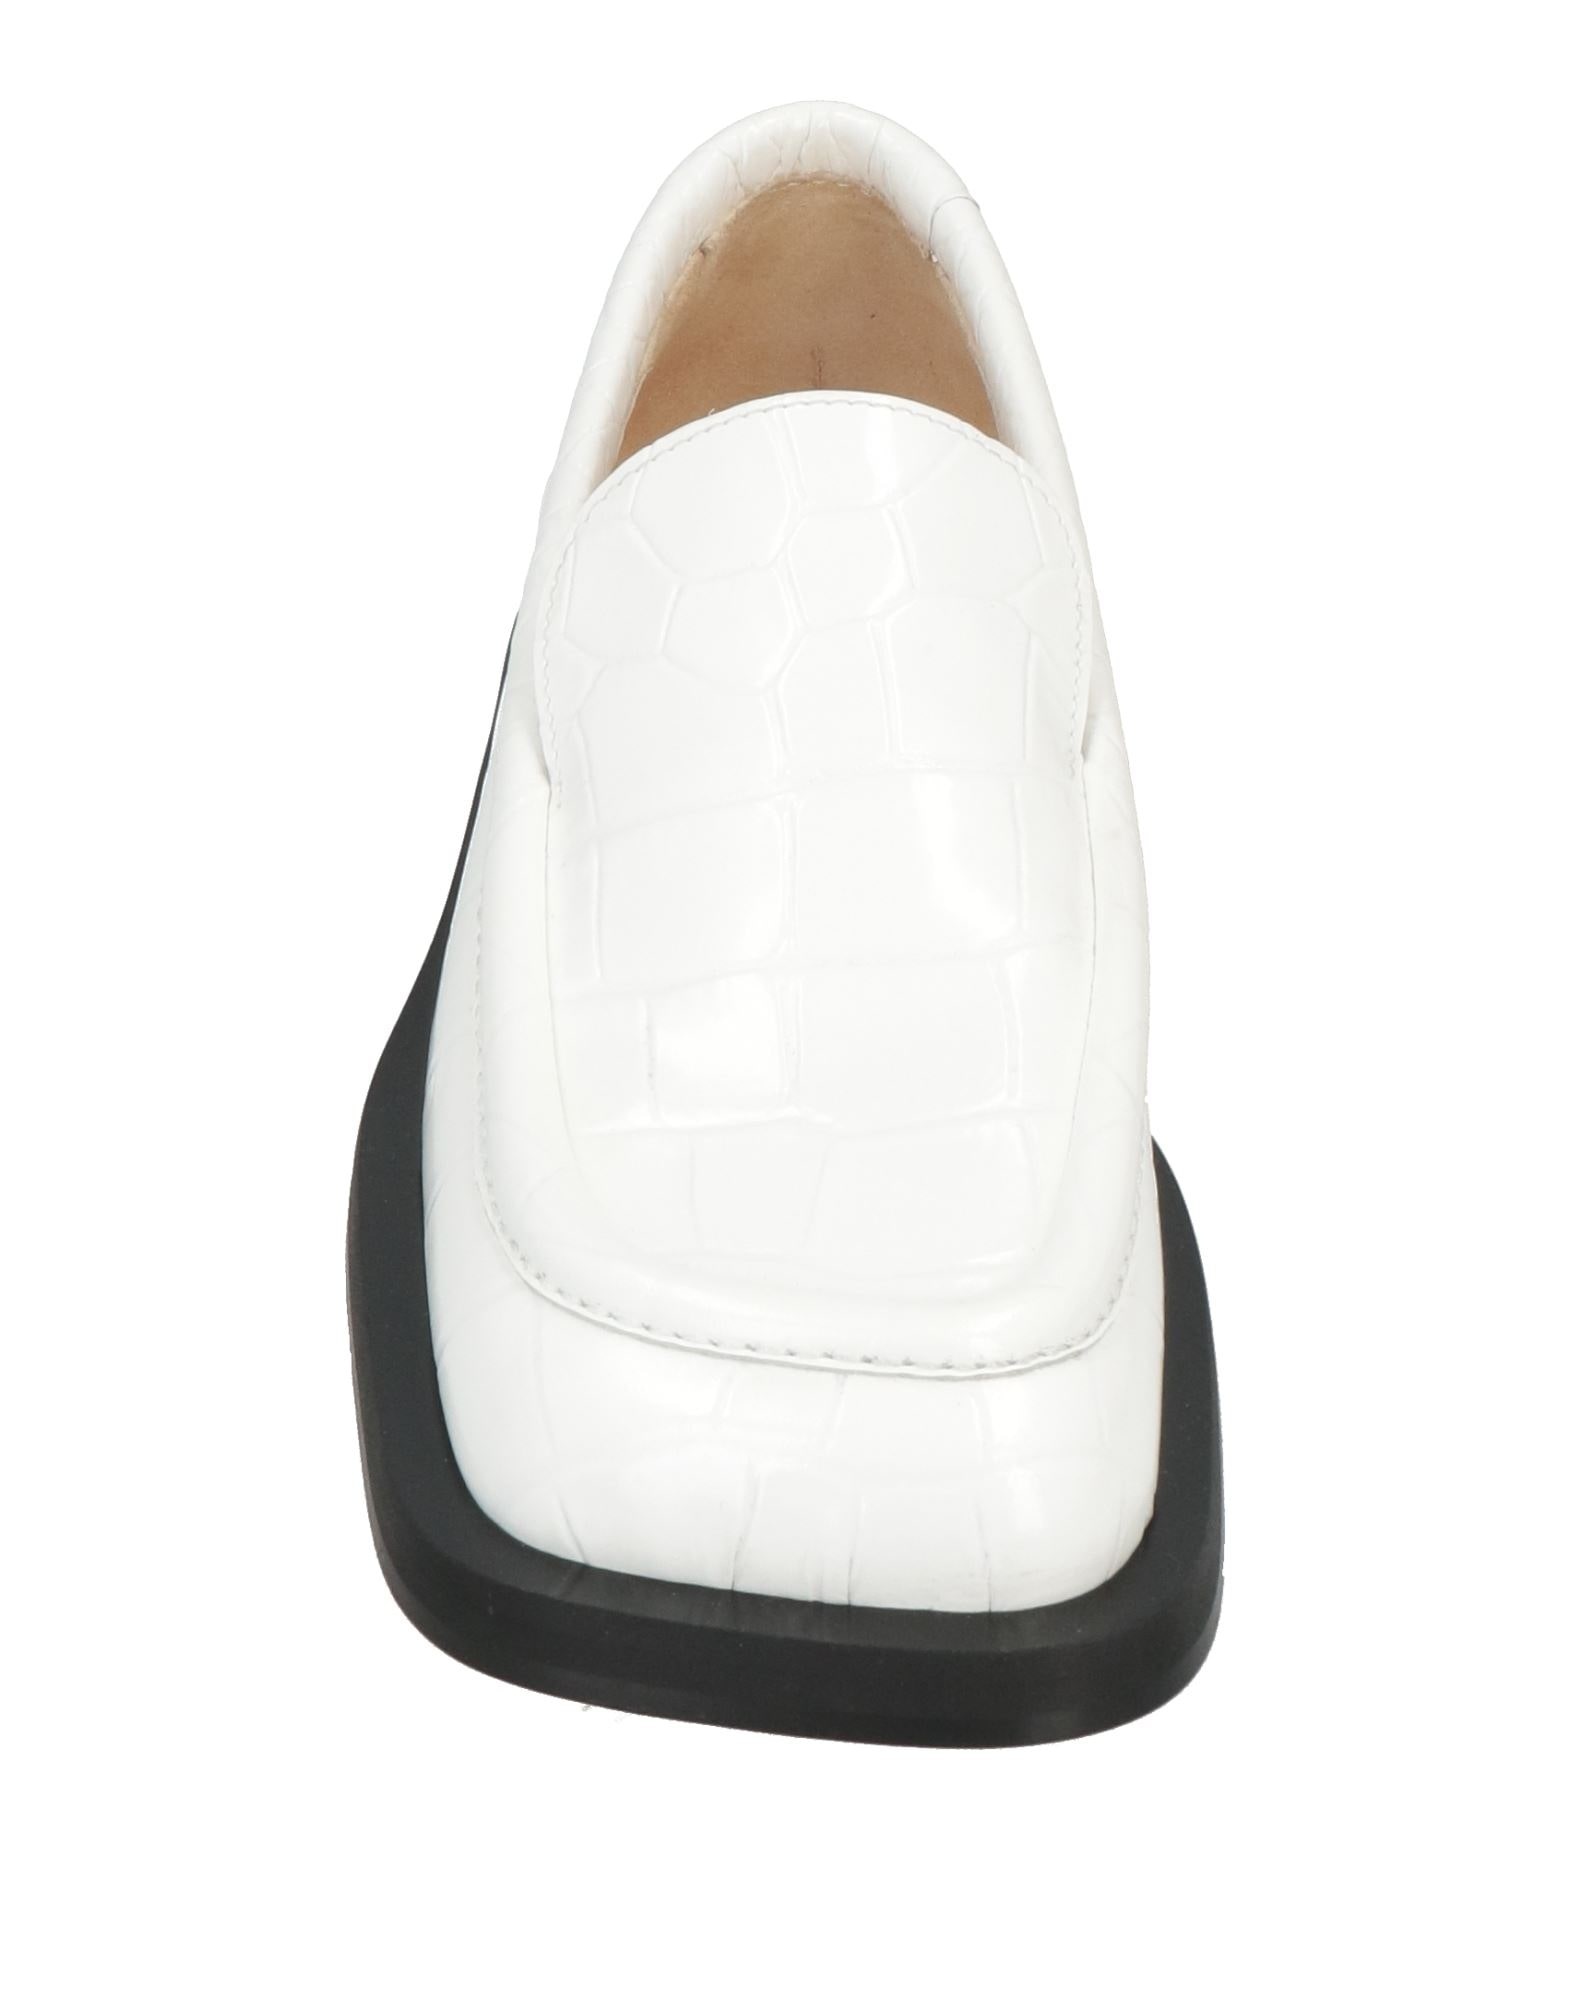 White Women's Loafers - 4